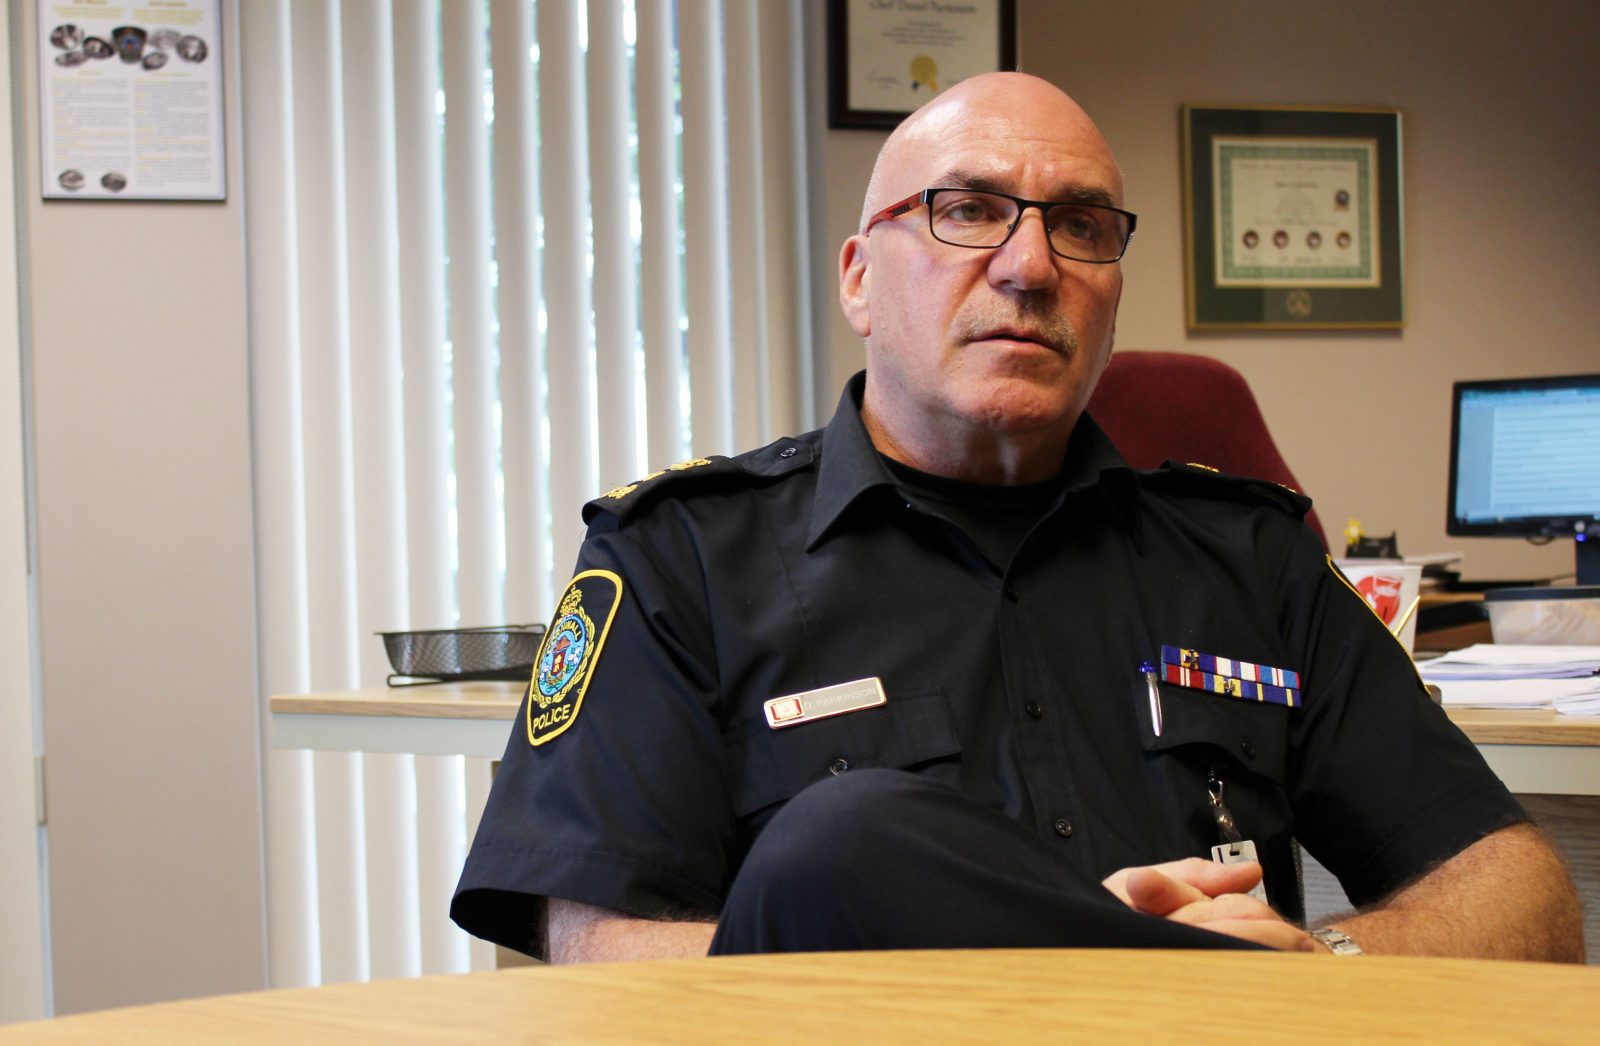 Police chief calls for changes to rules that allow suspended officers to collect pay